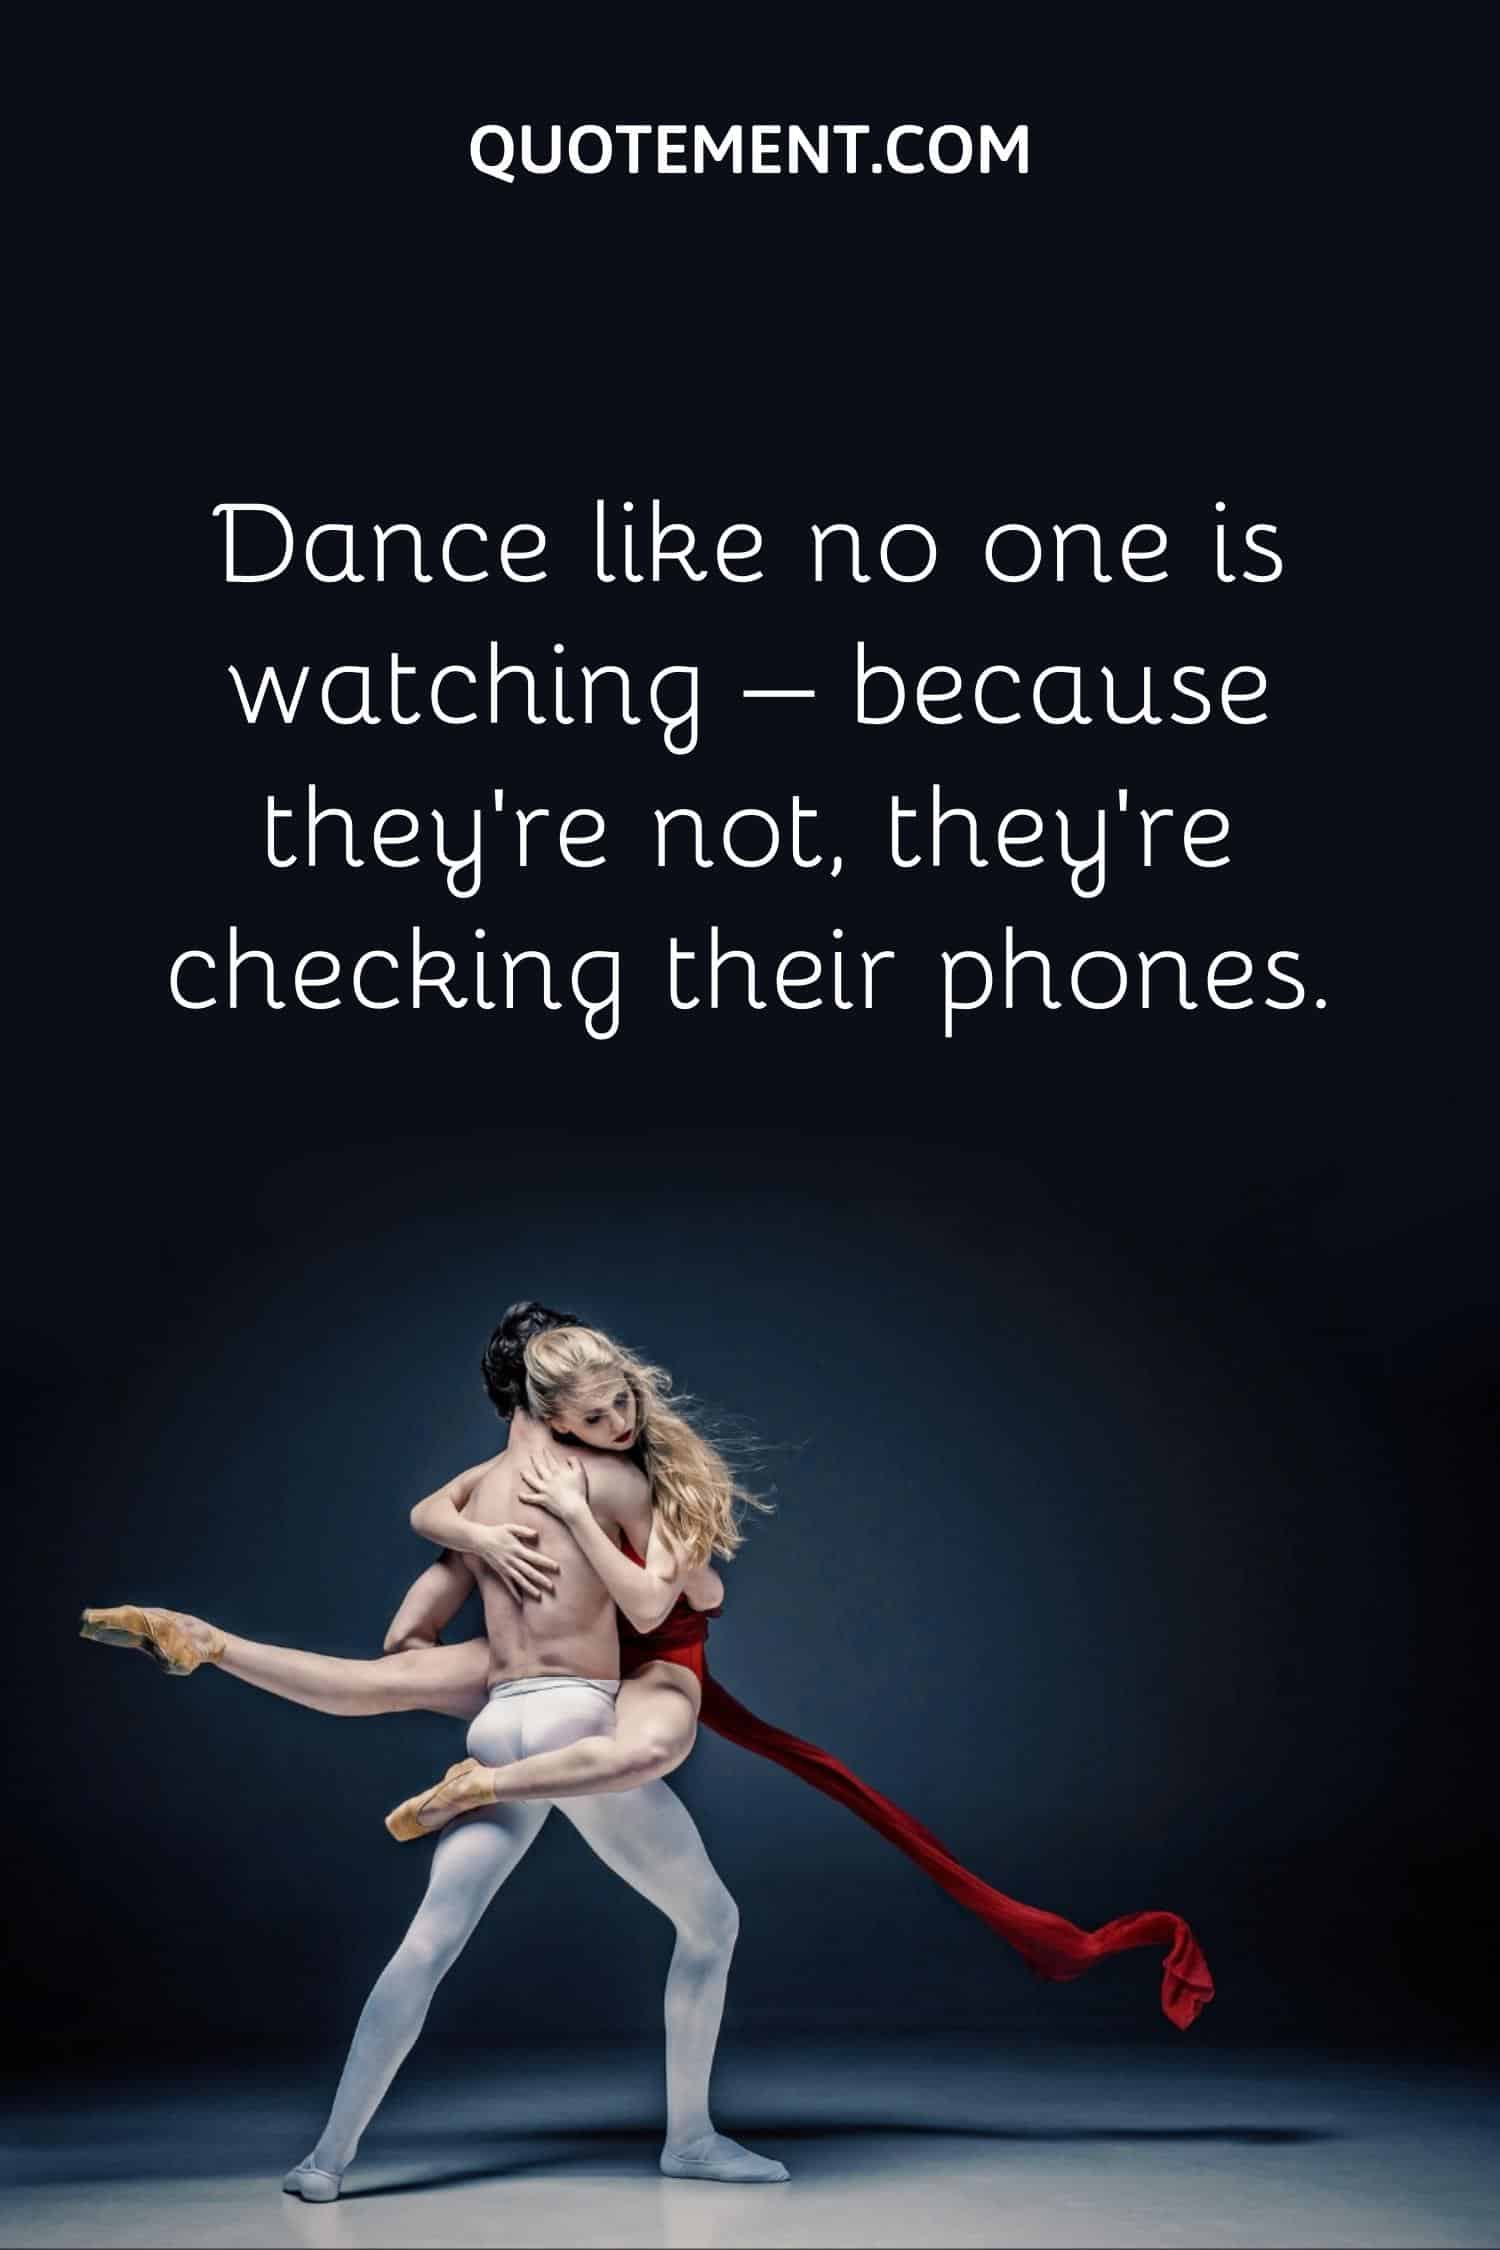 Dance like no one is watching – because they’re not